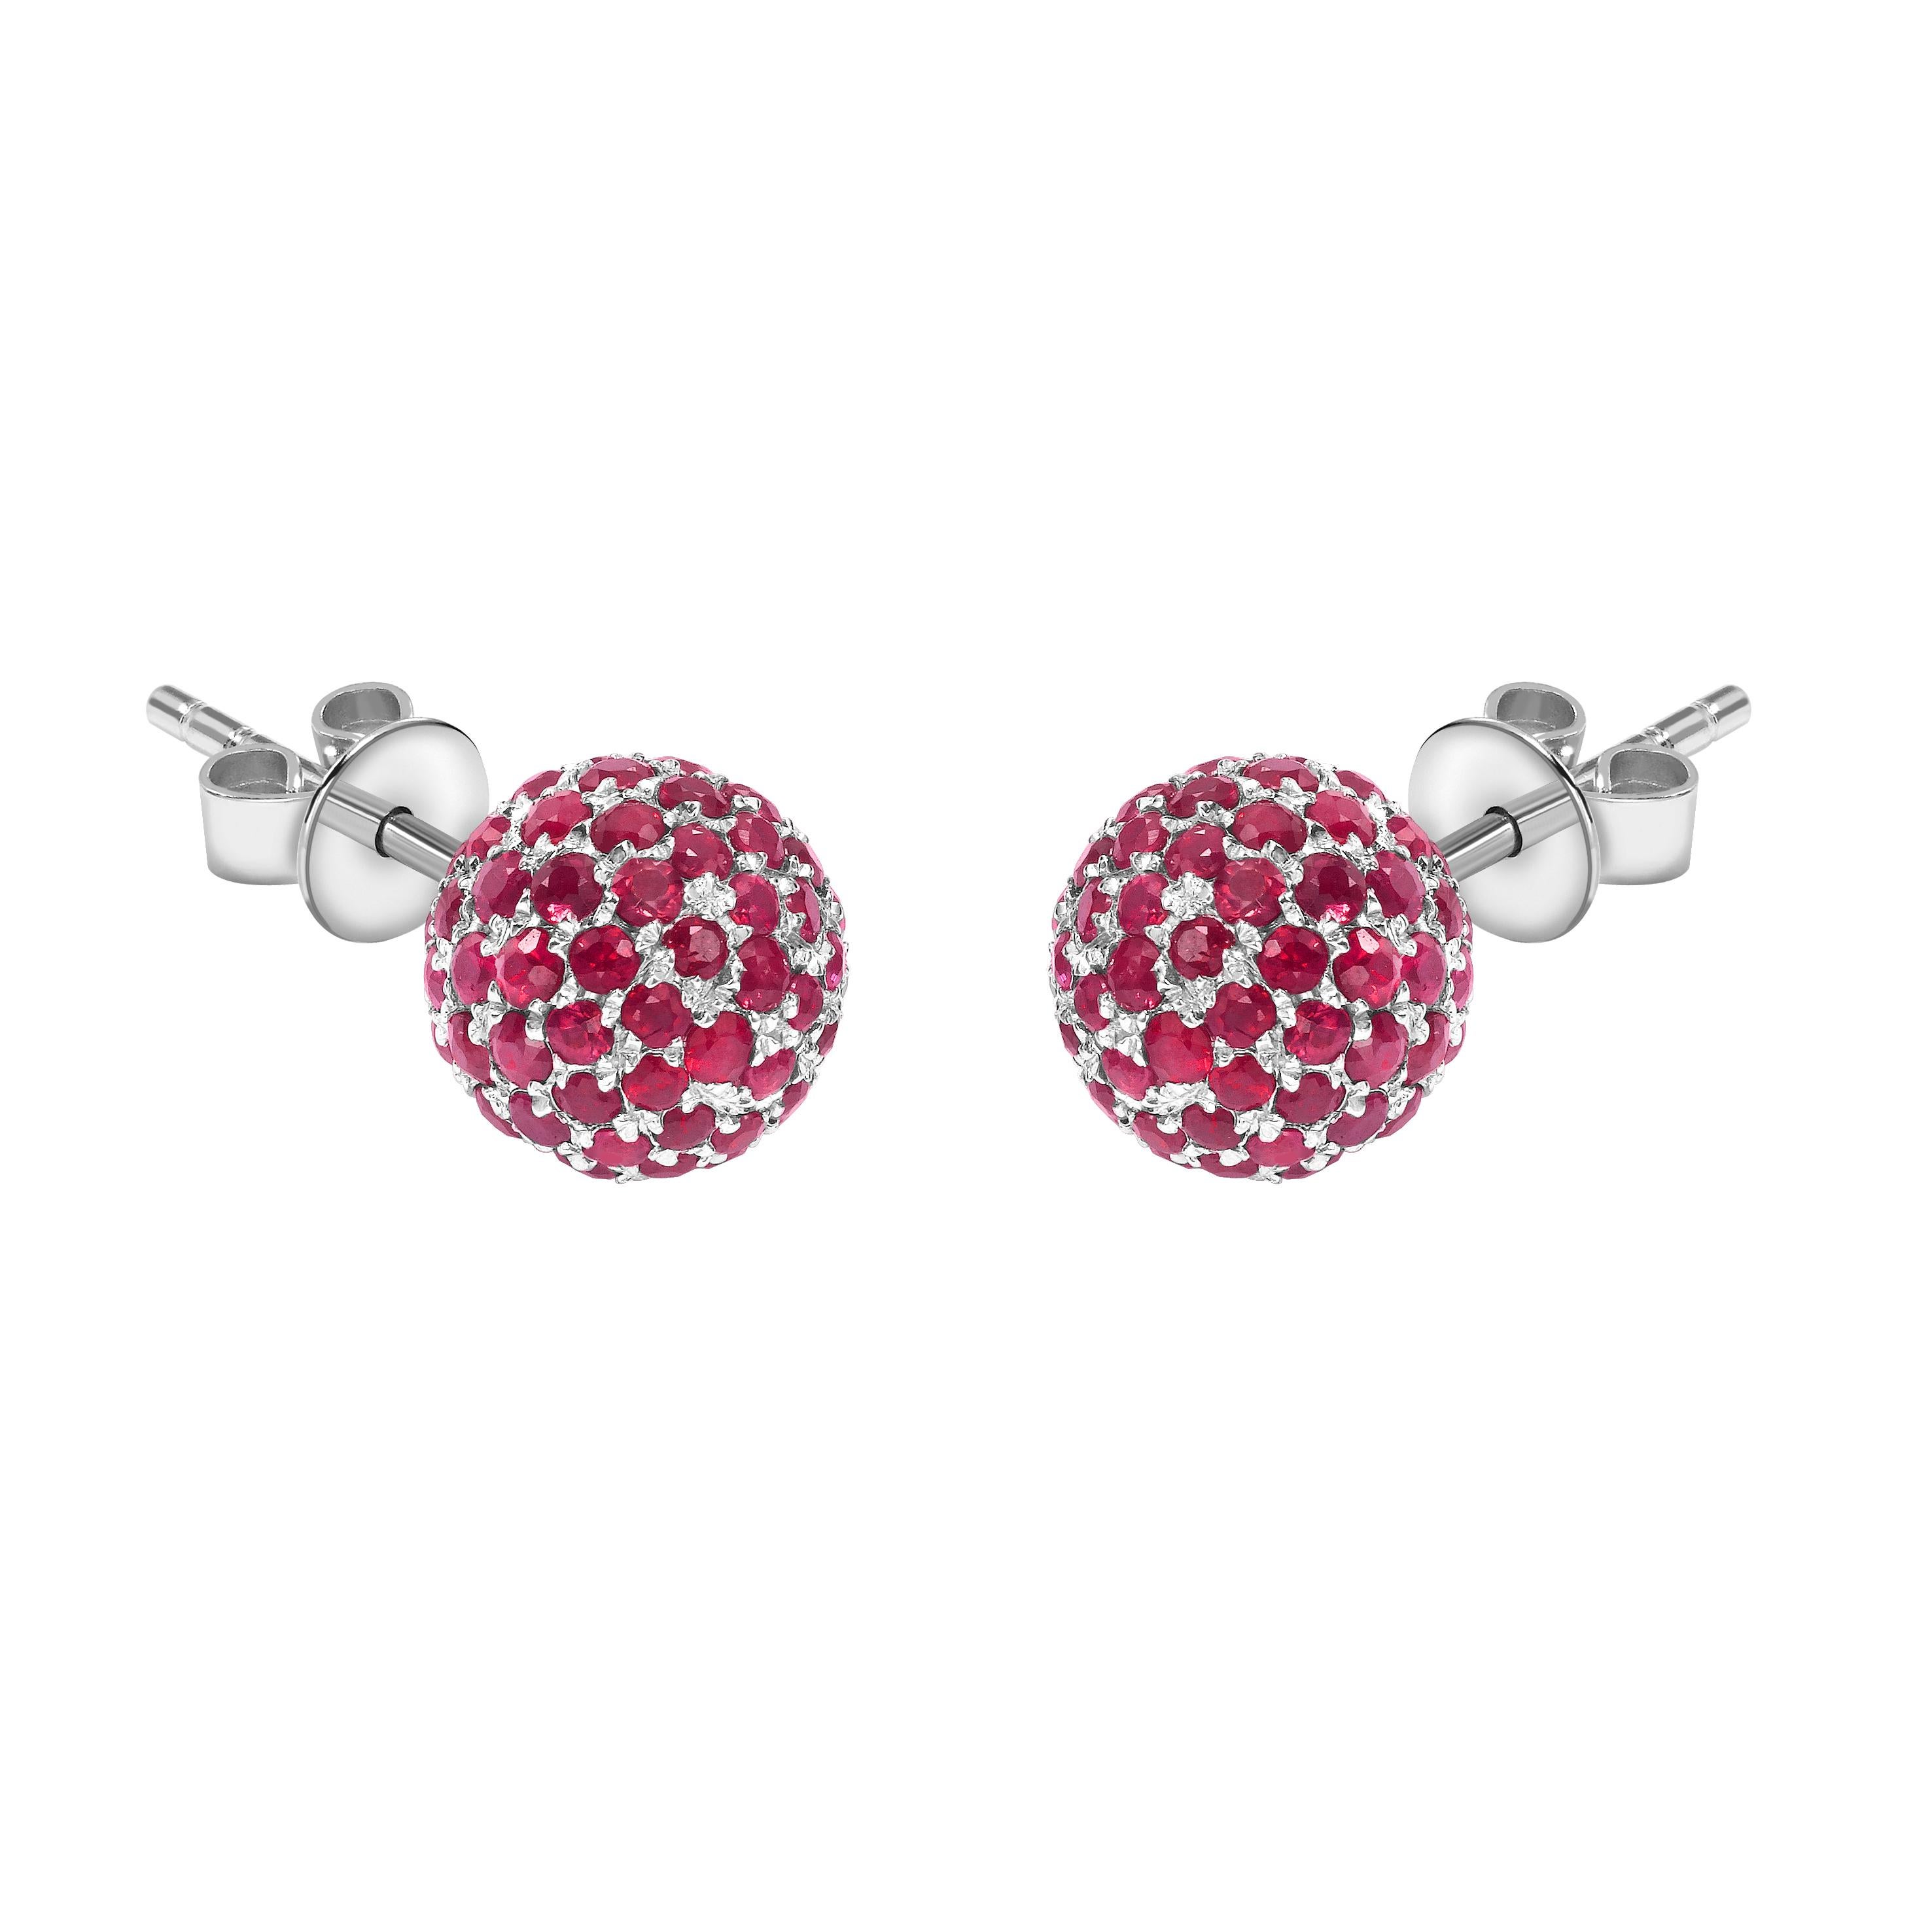 2.10 Carat Round Red Ruby Pave Set 18 KT White Gold Diamond Stud Earrings